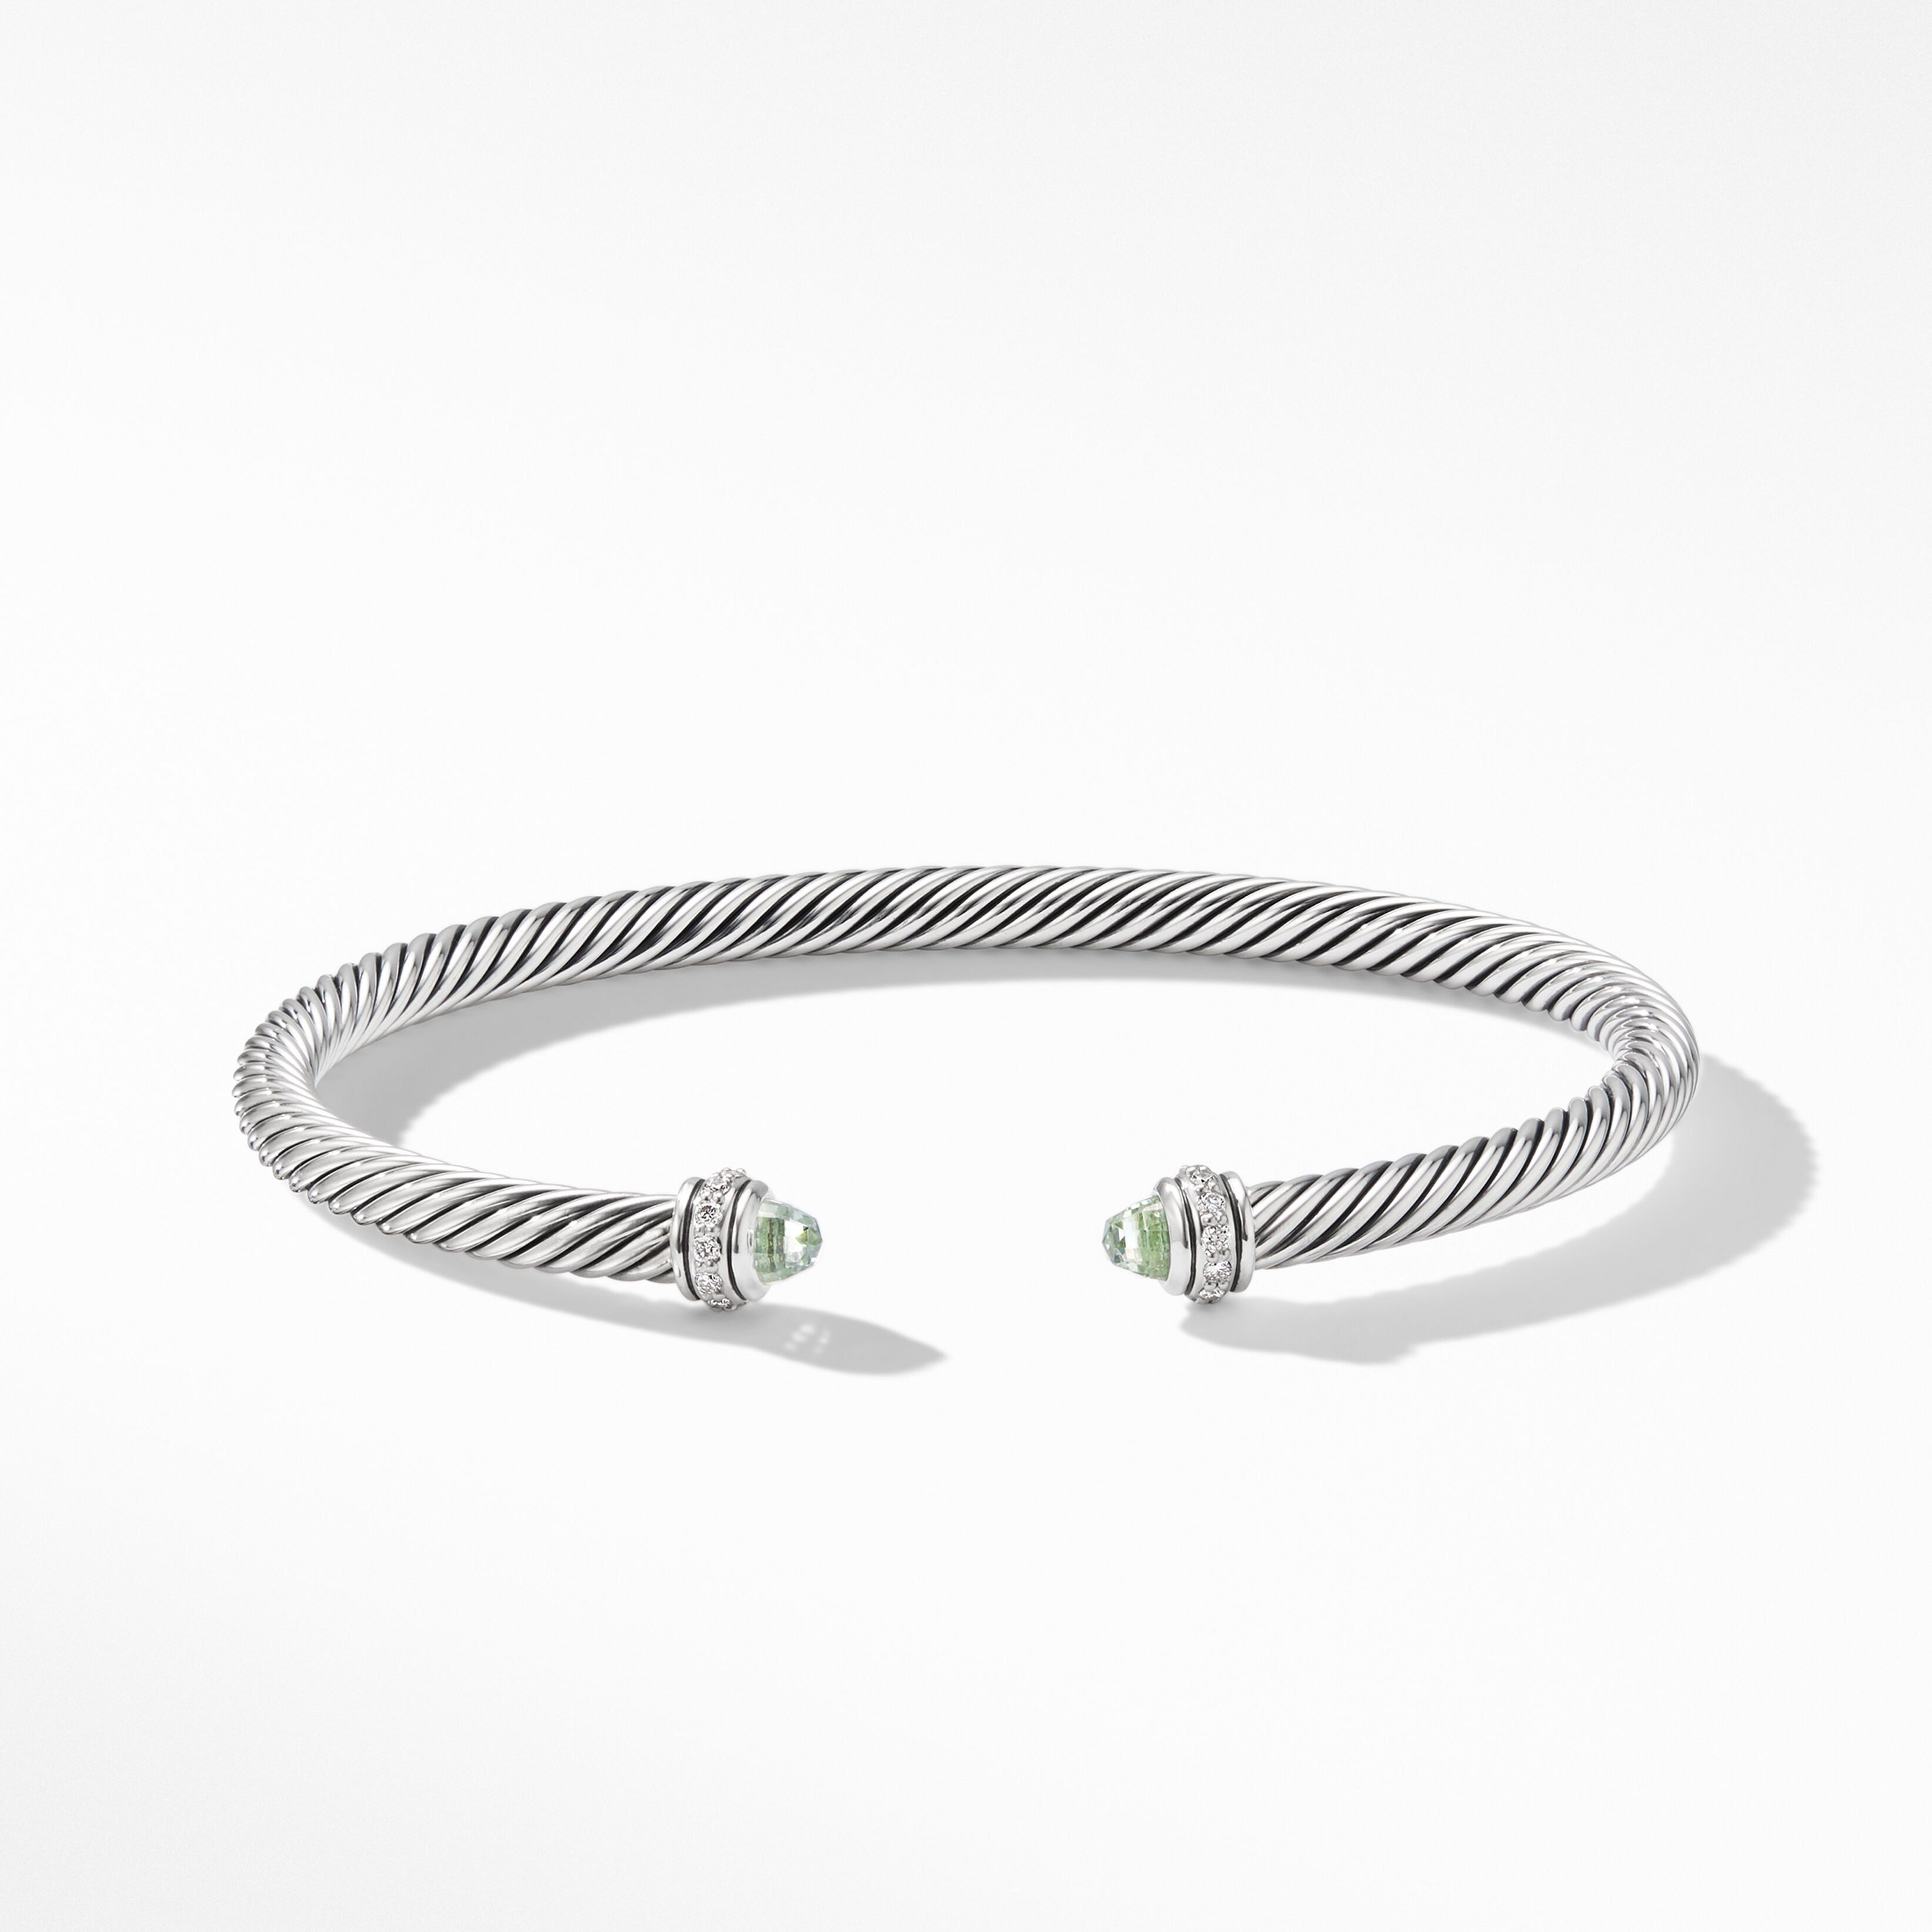 Cable Classics Bracelet in Sterling Silver with Prasiolite and Pavé Diamonds | David Yurman